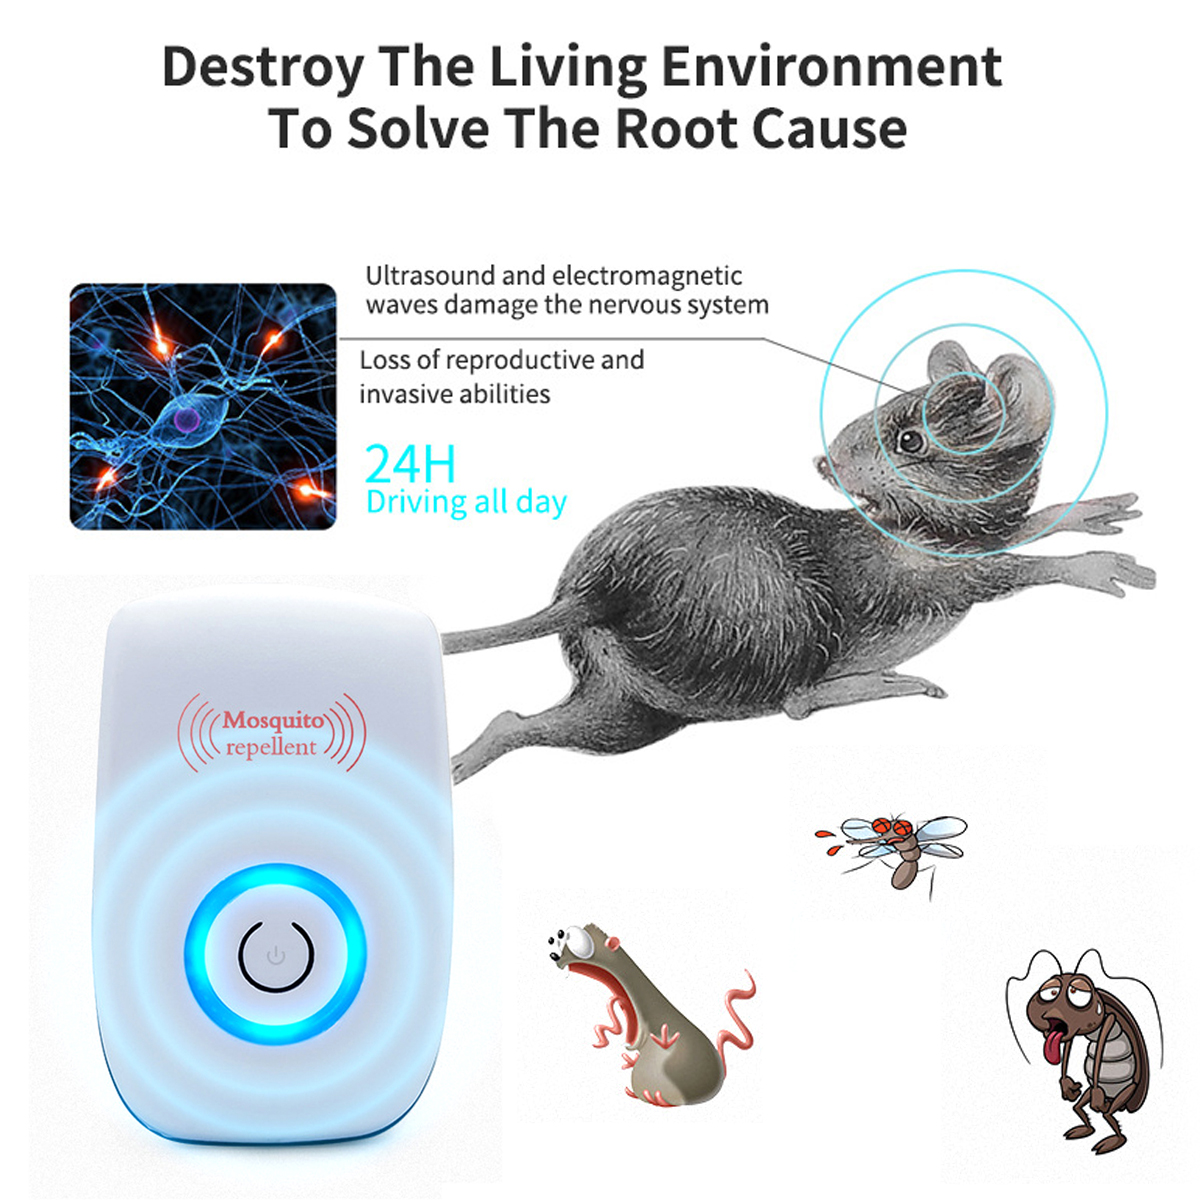 Ultrasonic-Electronic-Pests-Insect-Repeller-Anti-mouse-Mosquito-Cockroach-Rodent-Insect-Control-Kill-1636108-4